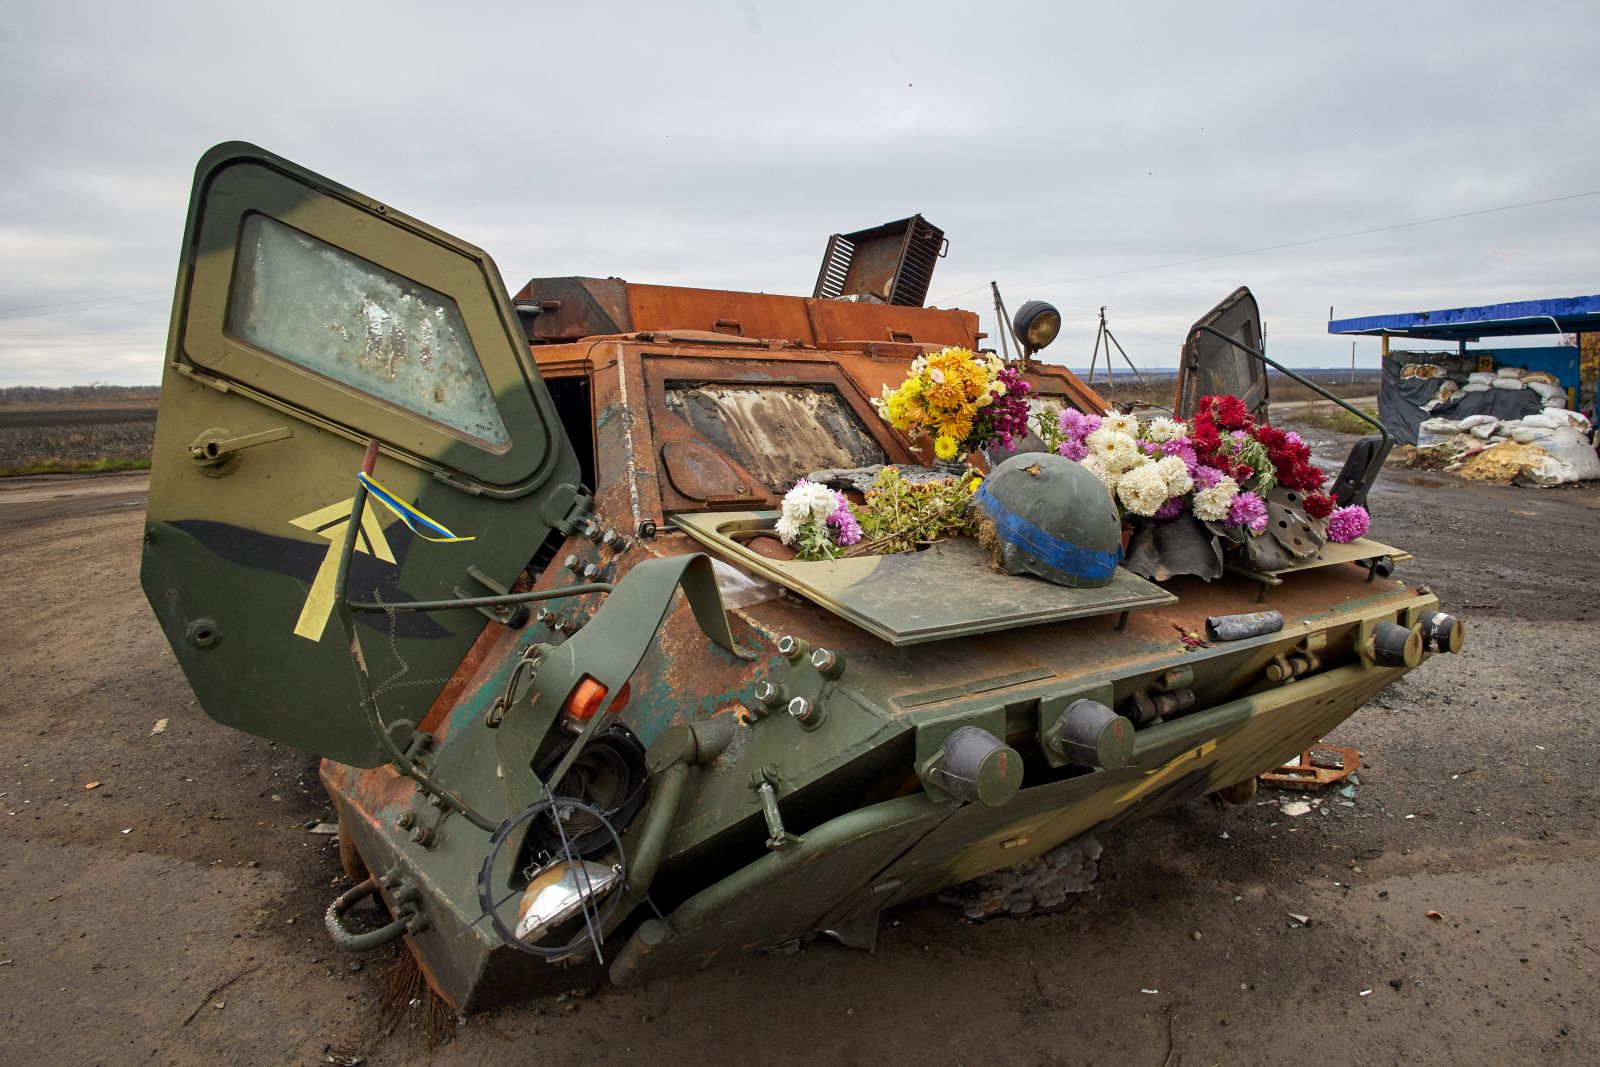 epa10292861 A damaged Ukrainian armoured personnel carrier (APC) with flowers on it put by local people in memory of the Ukrainian soldiers who died at this checkpoint, in the recently recaptured territory of the Kupiansk district, Kharkiv region, northeastern Ukraine, 07 November 2022, amid Russia's invasion. Kharkiv and surrounding areas have been the target of heavy shelling since February 2022, when Russian troops entered Ukraine starting a conflict that has provoked destruction and a humanitarian crisis. At the beginning of September 2022, the Ukrainian army pushed Russian forces from occupied territory in the northeast of the country in counterattacks.  EPA/SERGEY KOZLOV